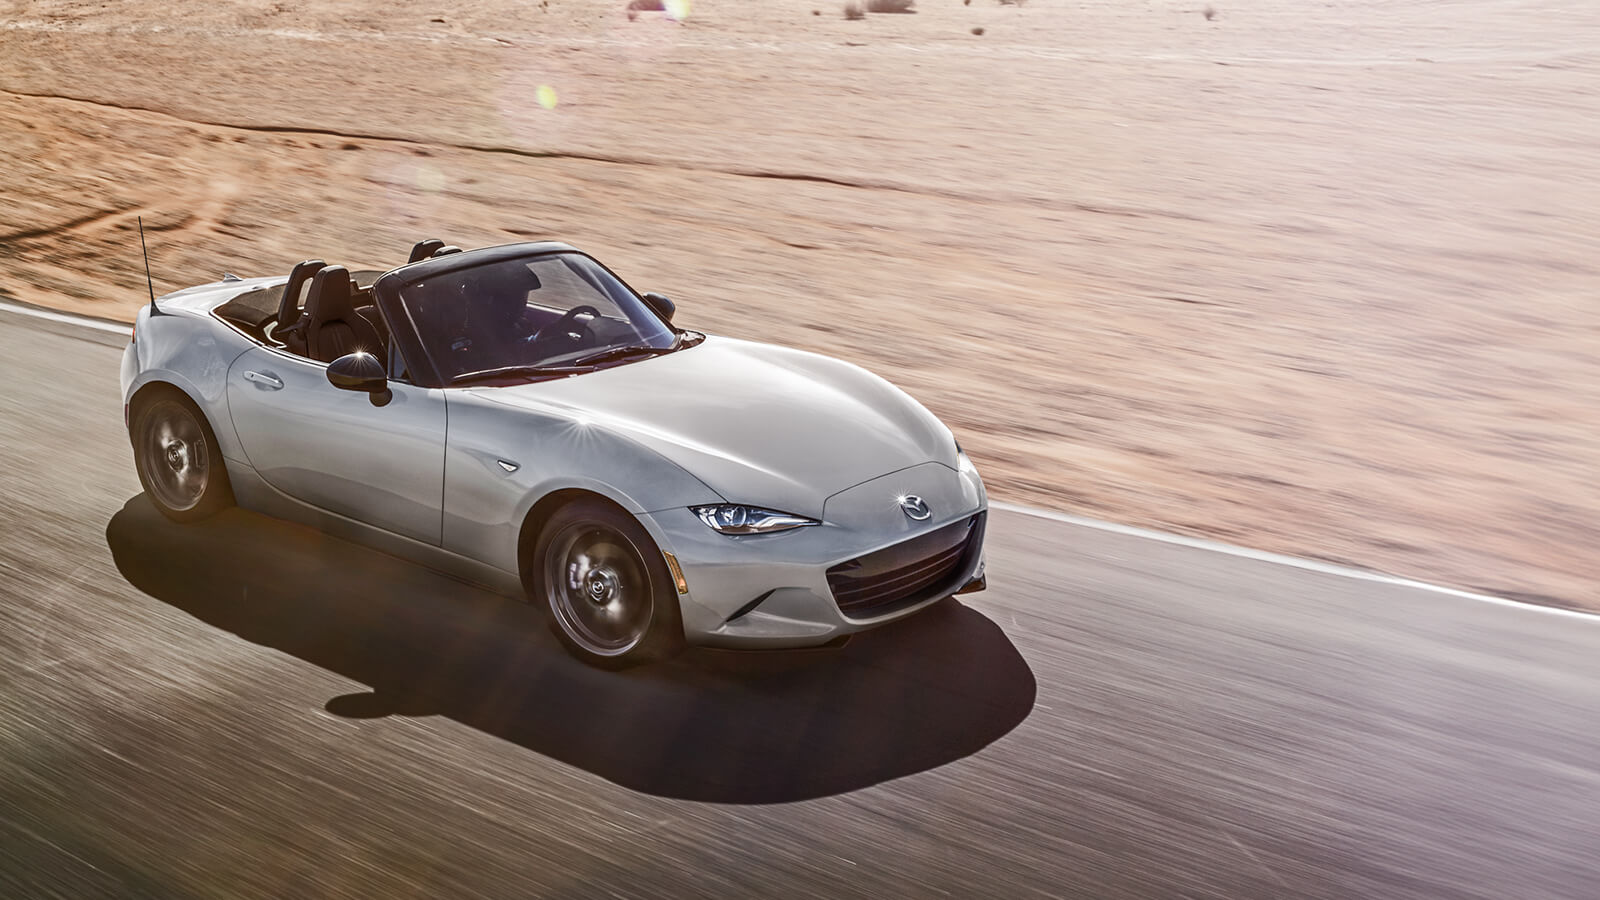 A lustrous Snowflake White Pearl MX-5 ST reflects sunlight as it drives down paved road next to sandy beach. 